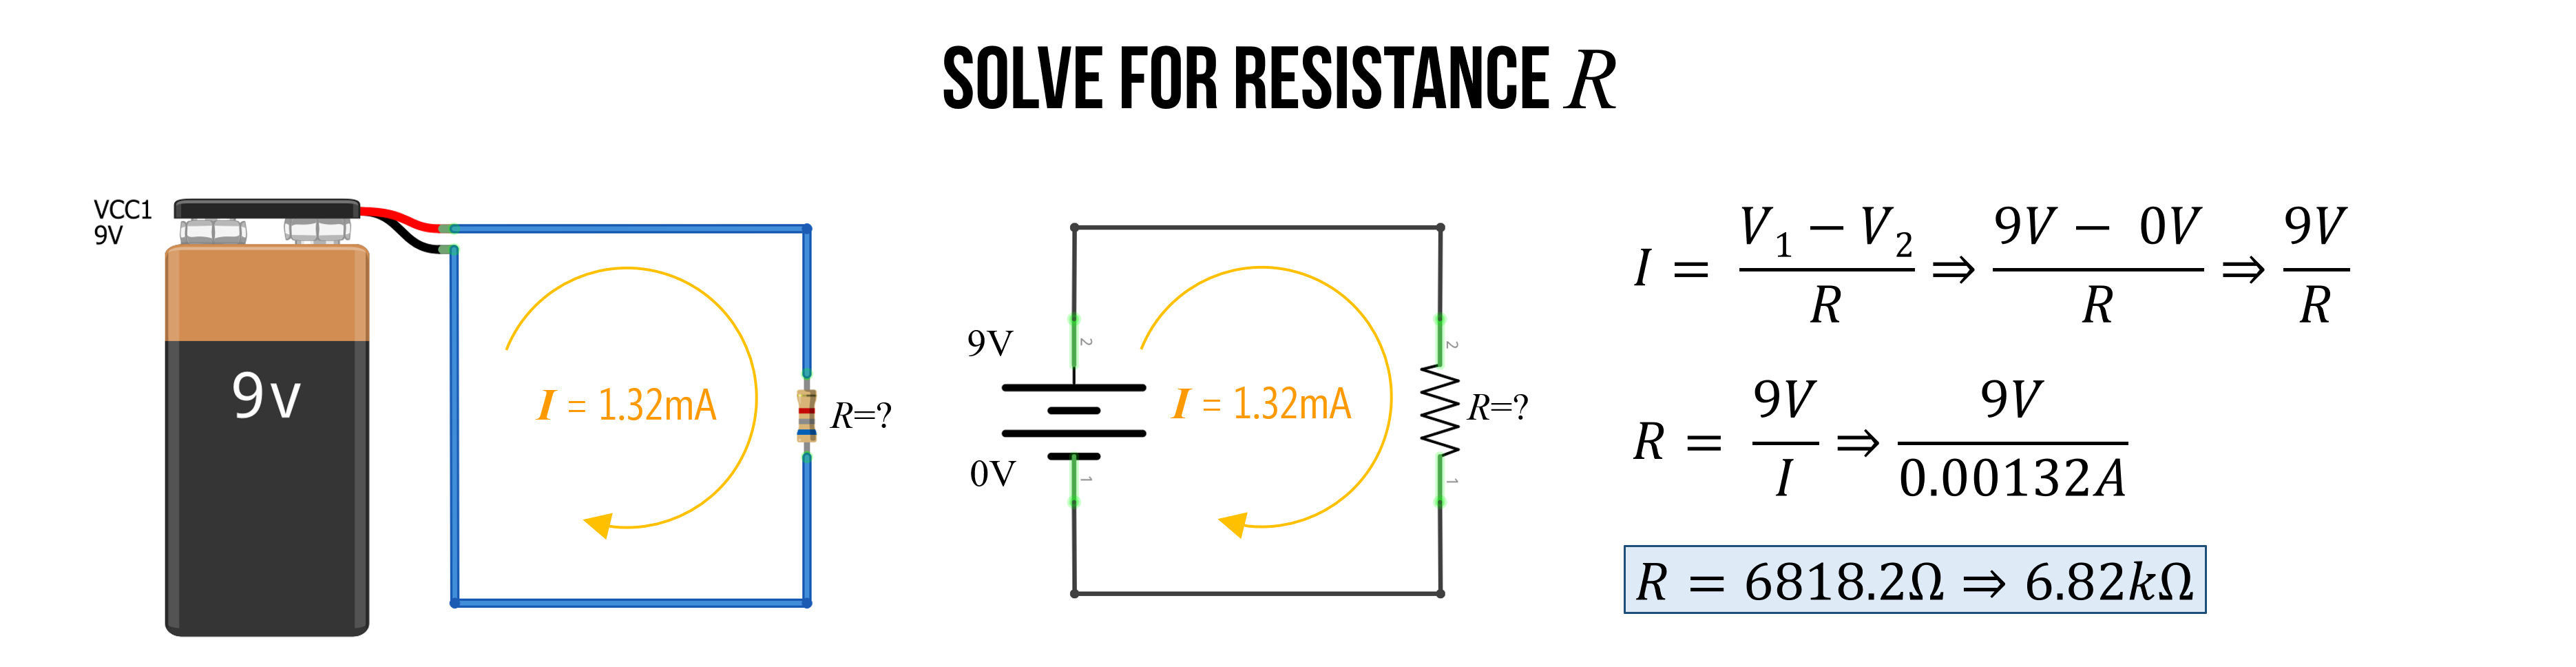 Diagram shows a similar circuit as before but with an unknown resistance R and a known voltage (V=9V) and a known current (I=50mA) . Given this information, we can use R = V / I to solve for R. So, R = 9V/50mA => 6.82kΩ